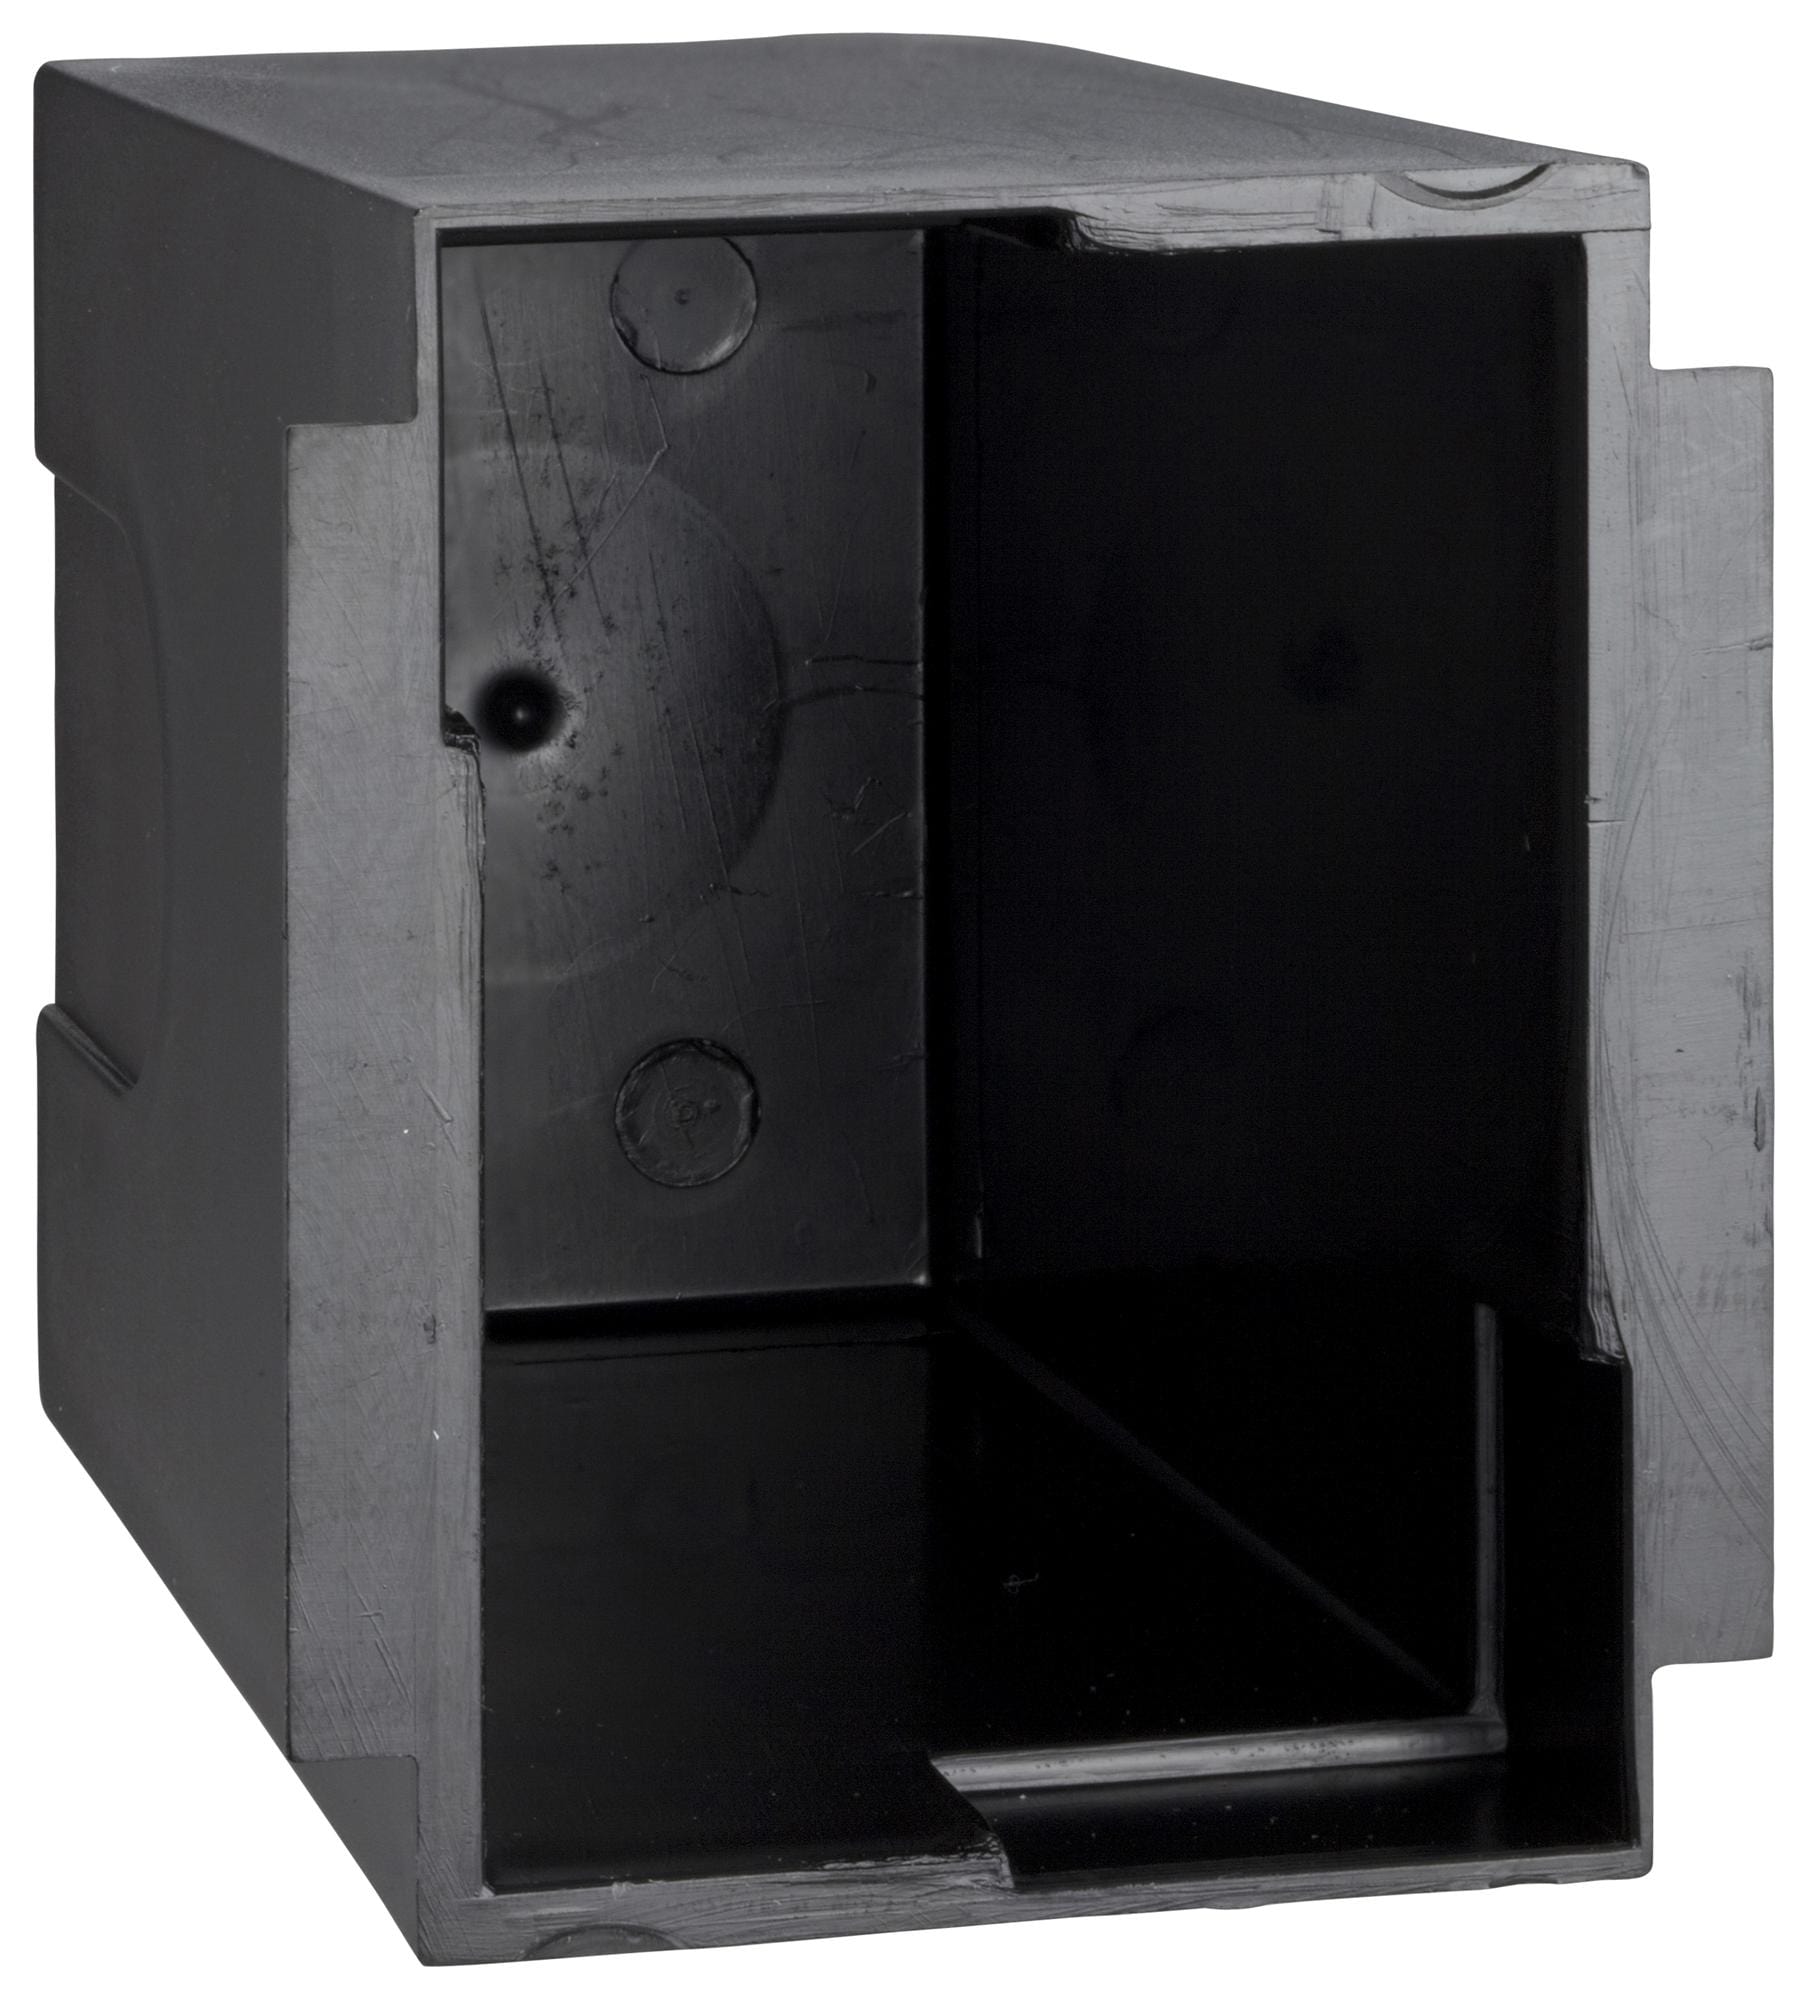 XAPE904 REAR PROTECTIVE COVE SCHNEIDER ELECTRIC